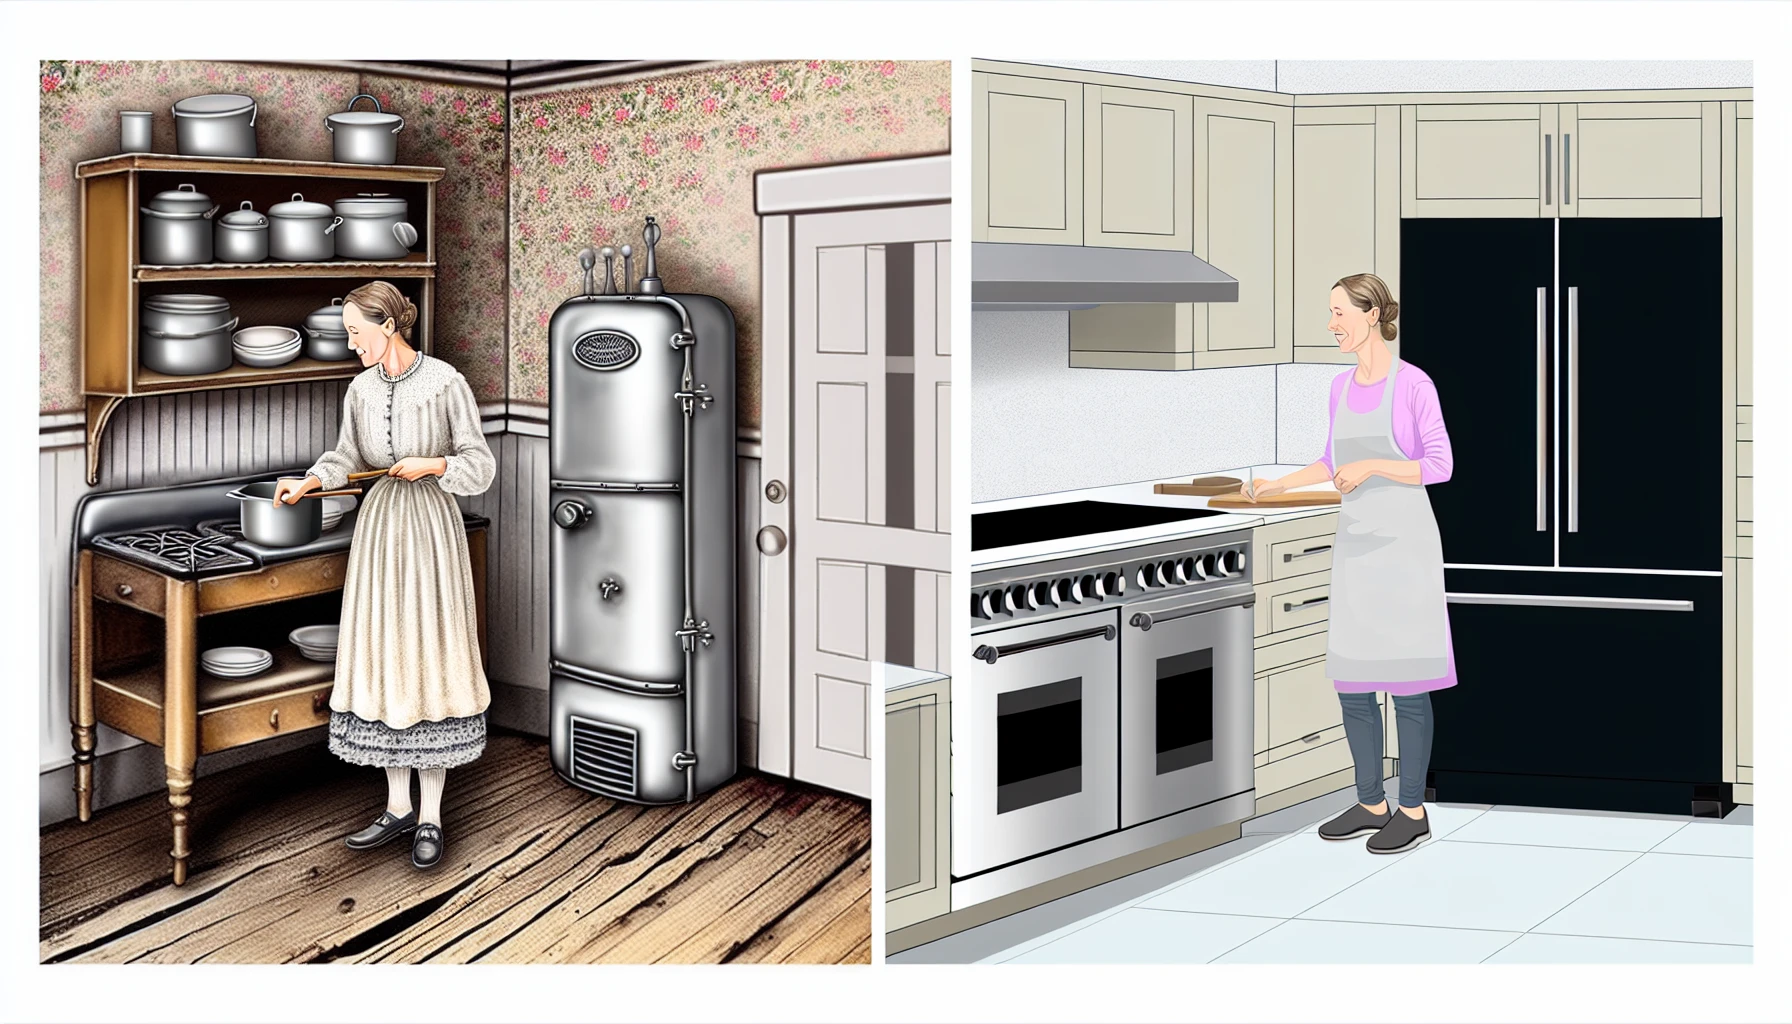 Comparison of early 20th-century kitchen and modern kitchen